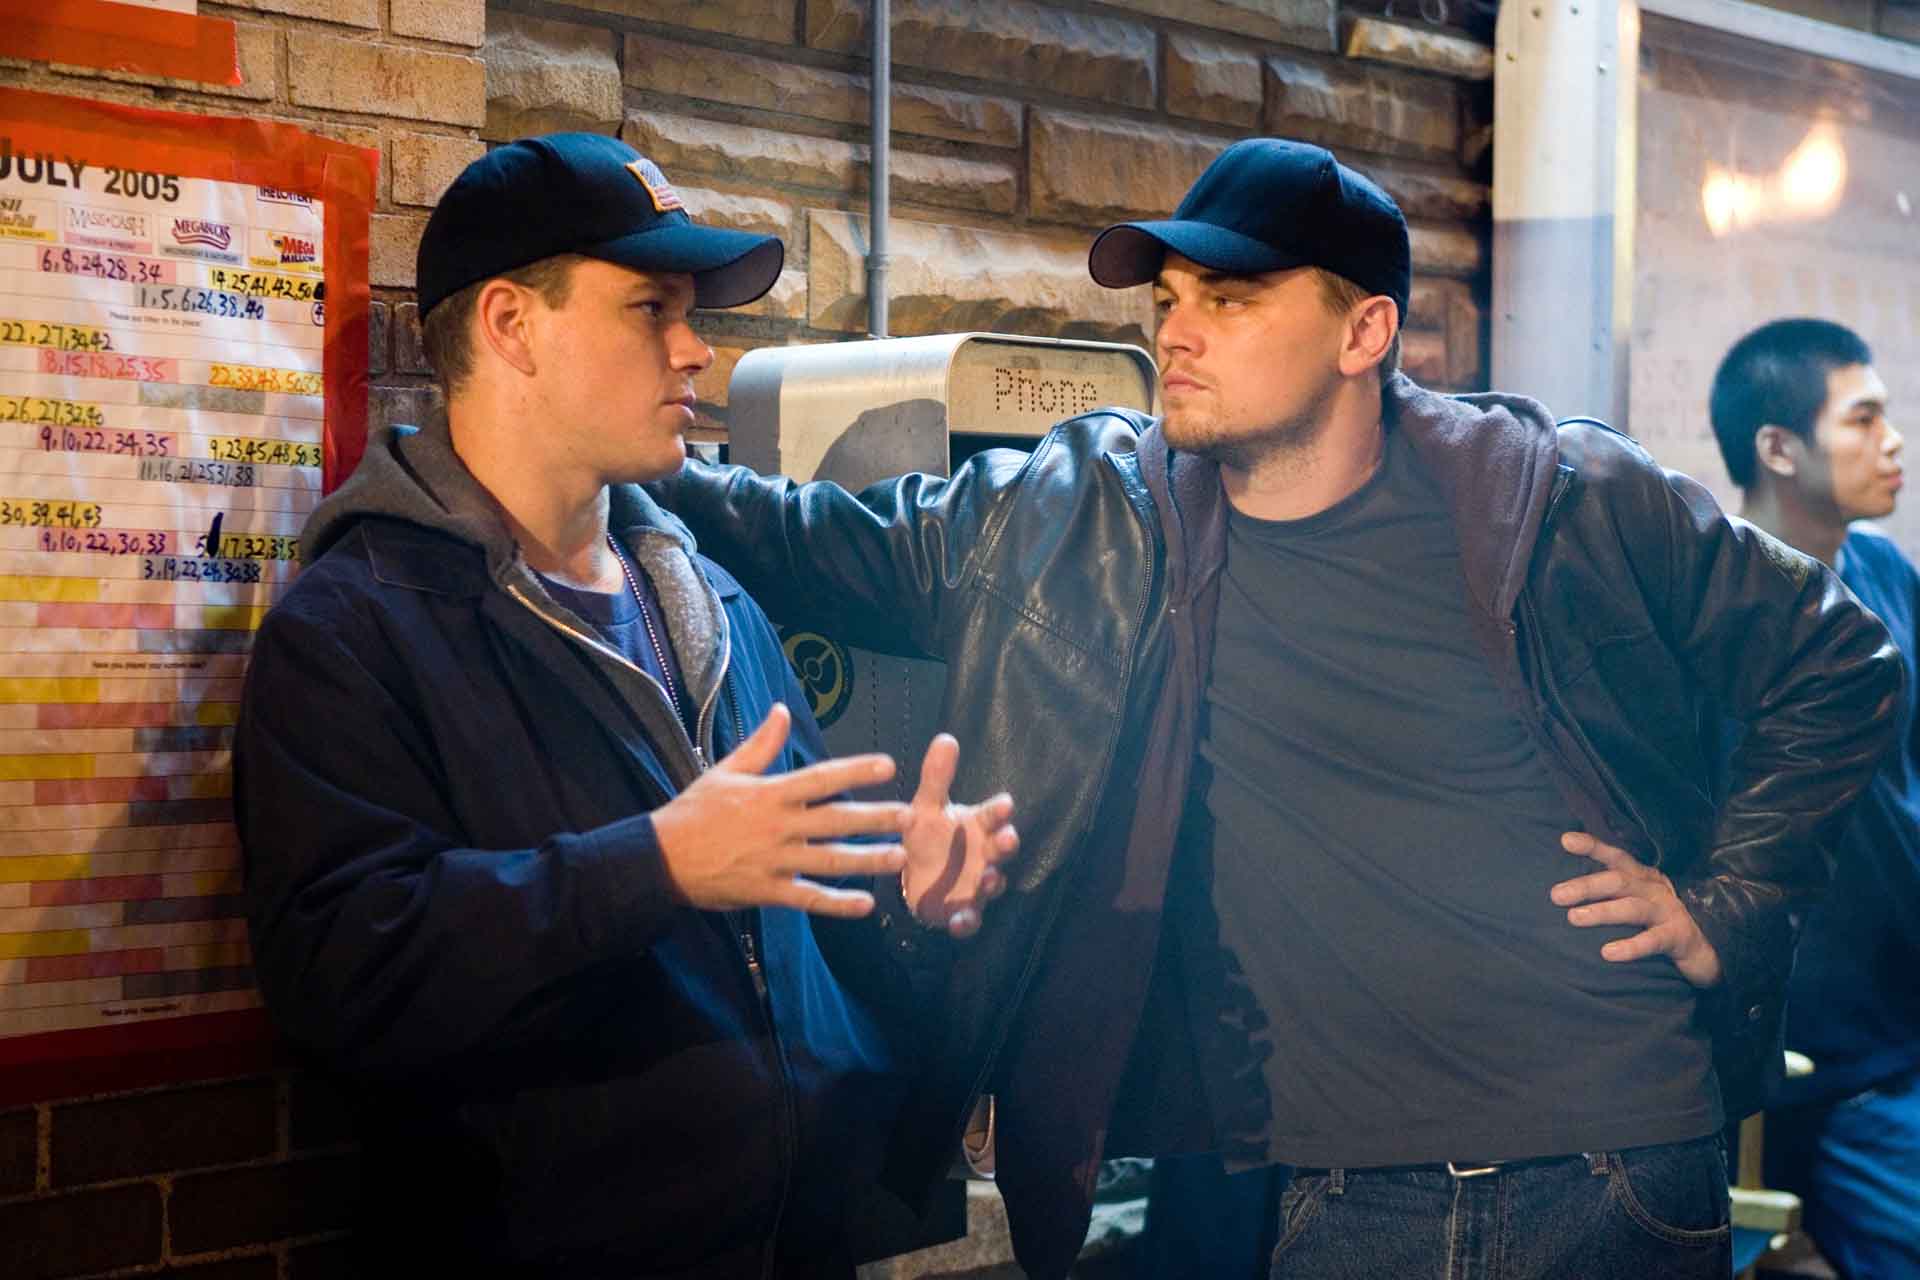 The Departed Latest HD Wallpaper Free Download. New HD